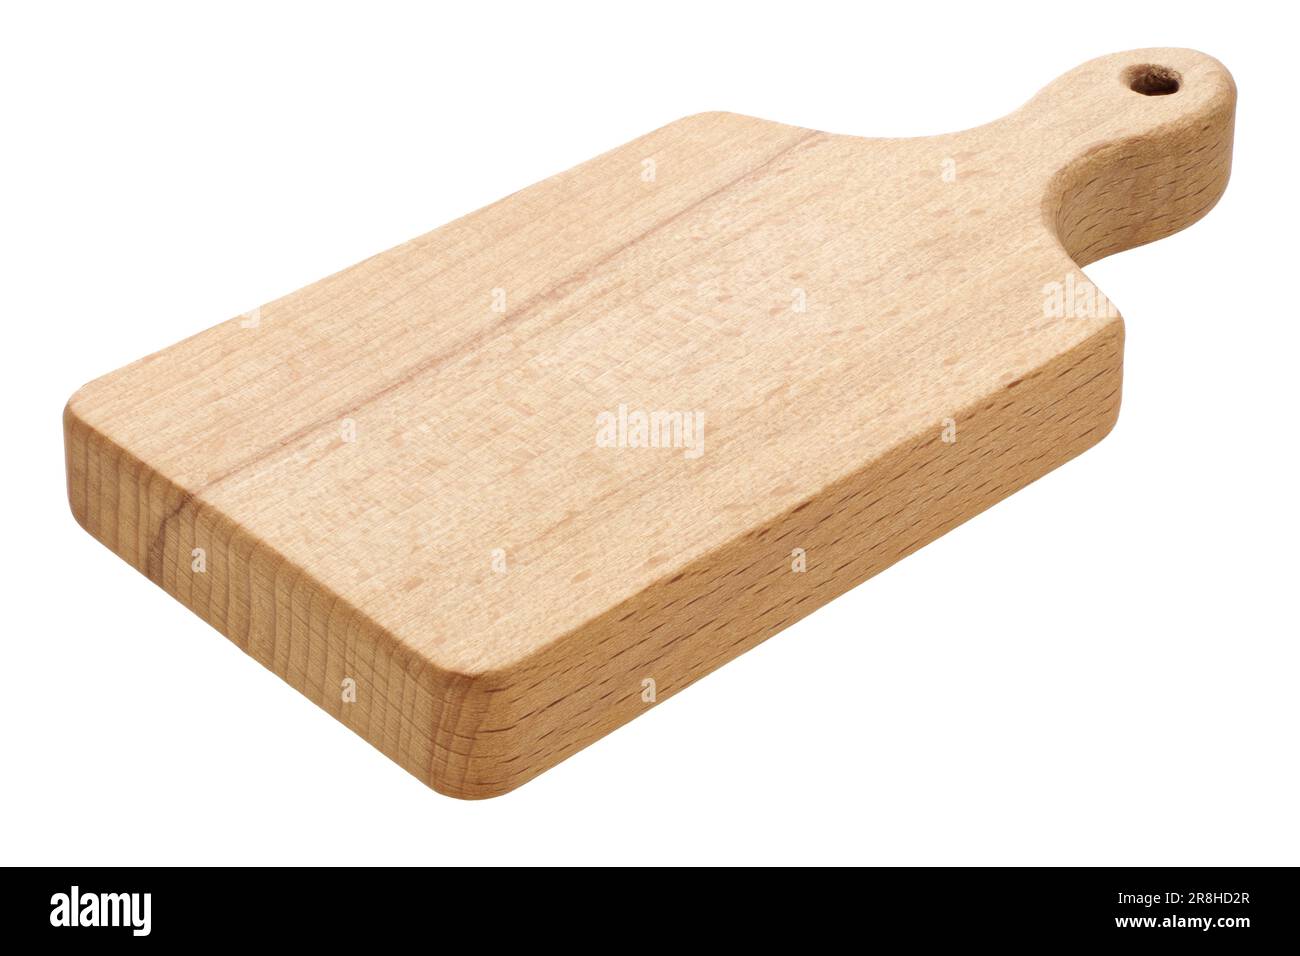 Traditional wooden cutting board, diagonal view, close-up shot, isolated on white background Stock Photo